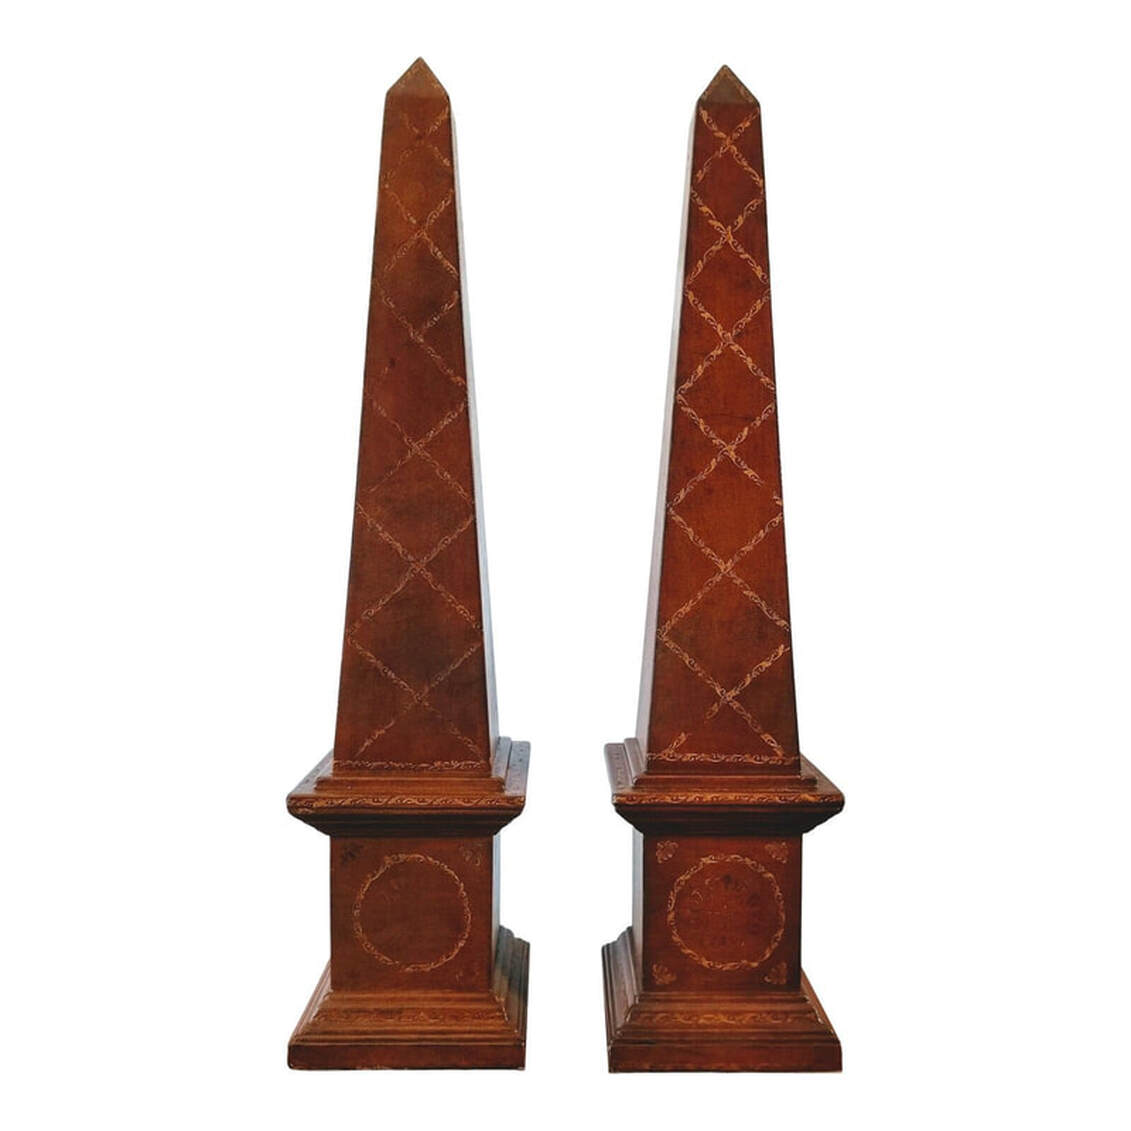 Pair of embossed leather obelisks were manufactured for the designer decor market in the late 20th century. The leather has been given an aged finish to replicate the patina of antiques.  SIZE:  7.25